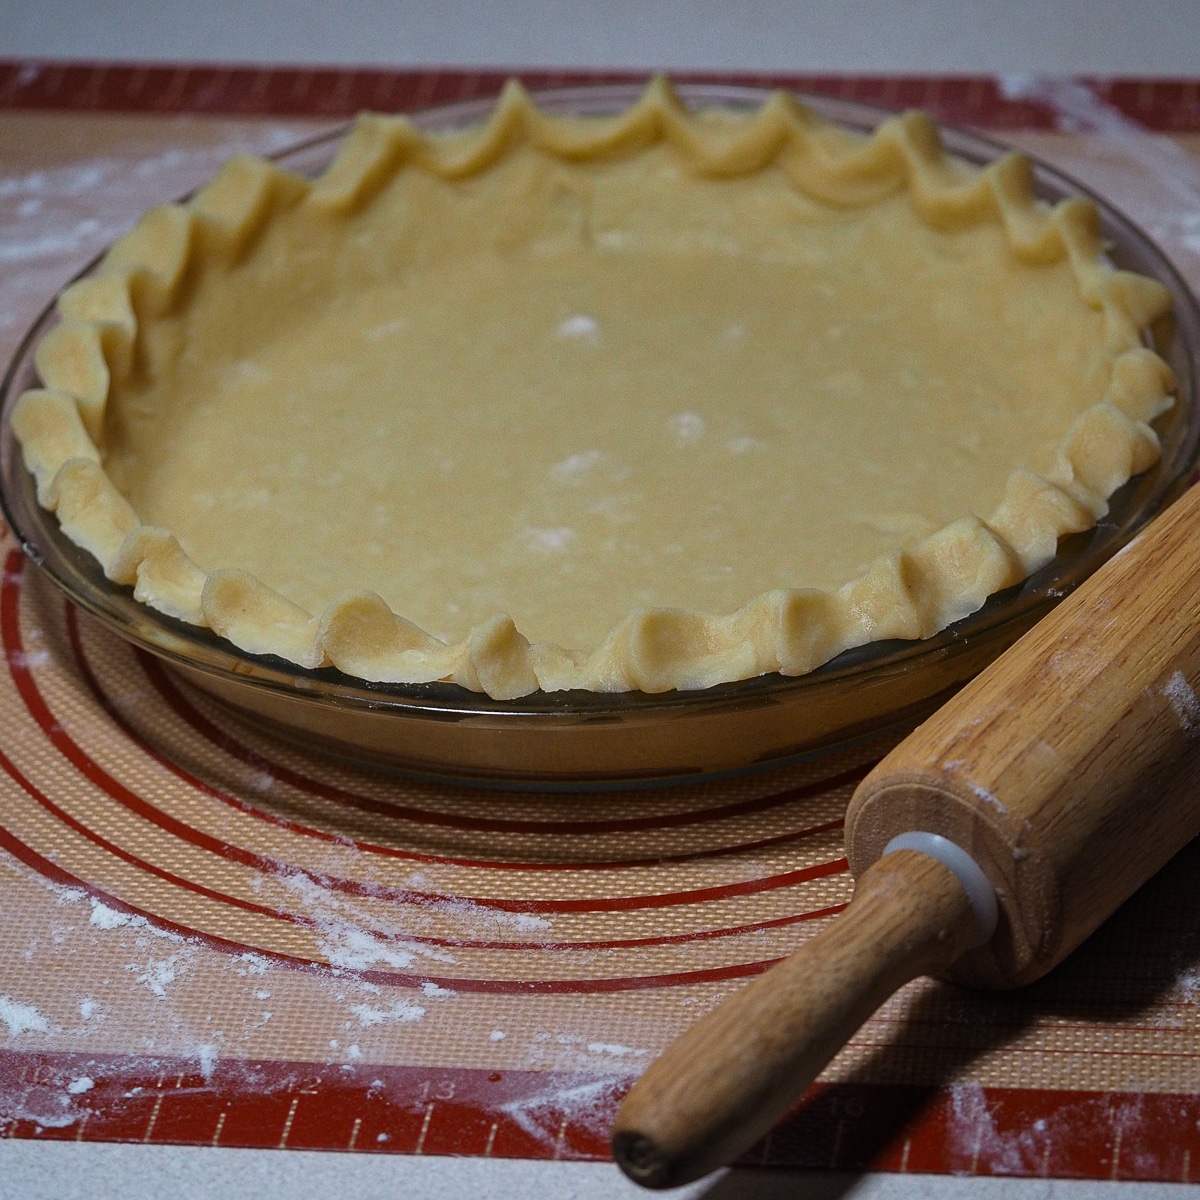 Pie dough on a glass pie dish with wooden rolling pin on the side.